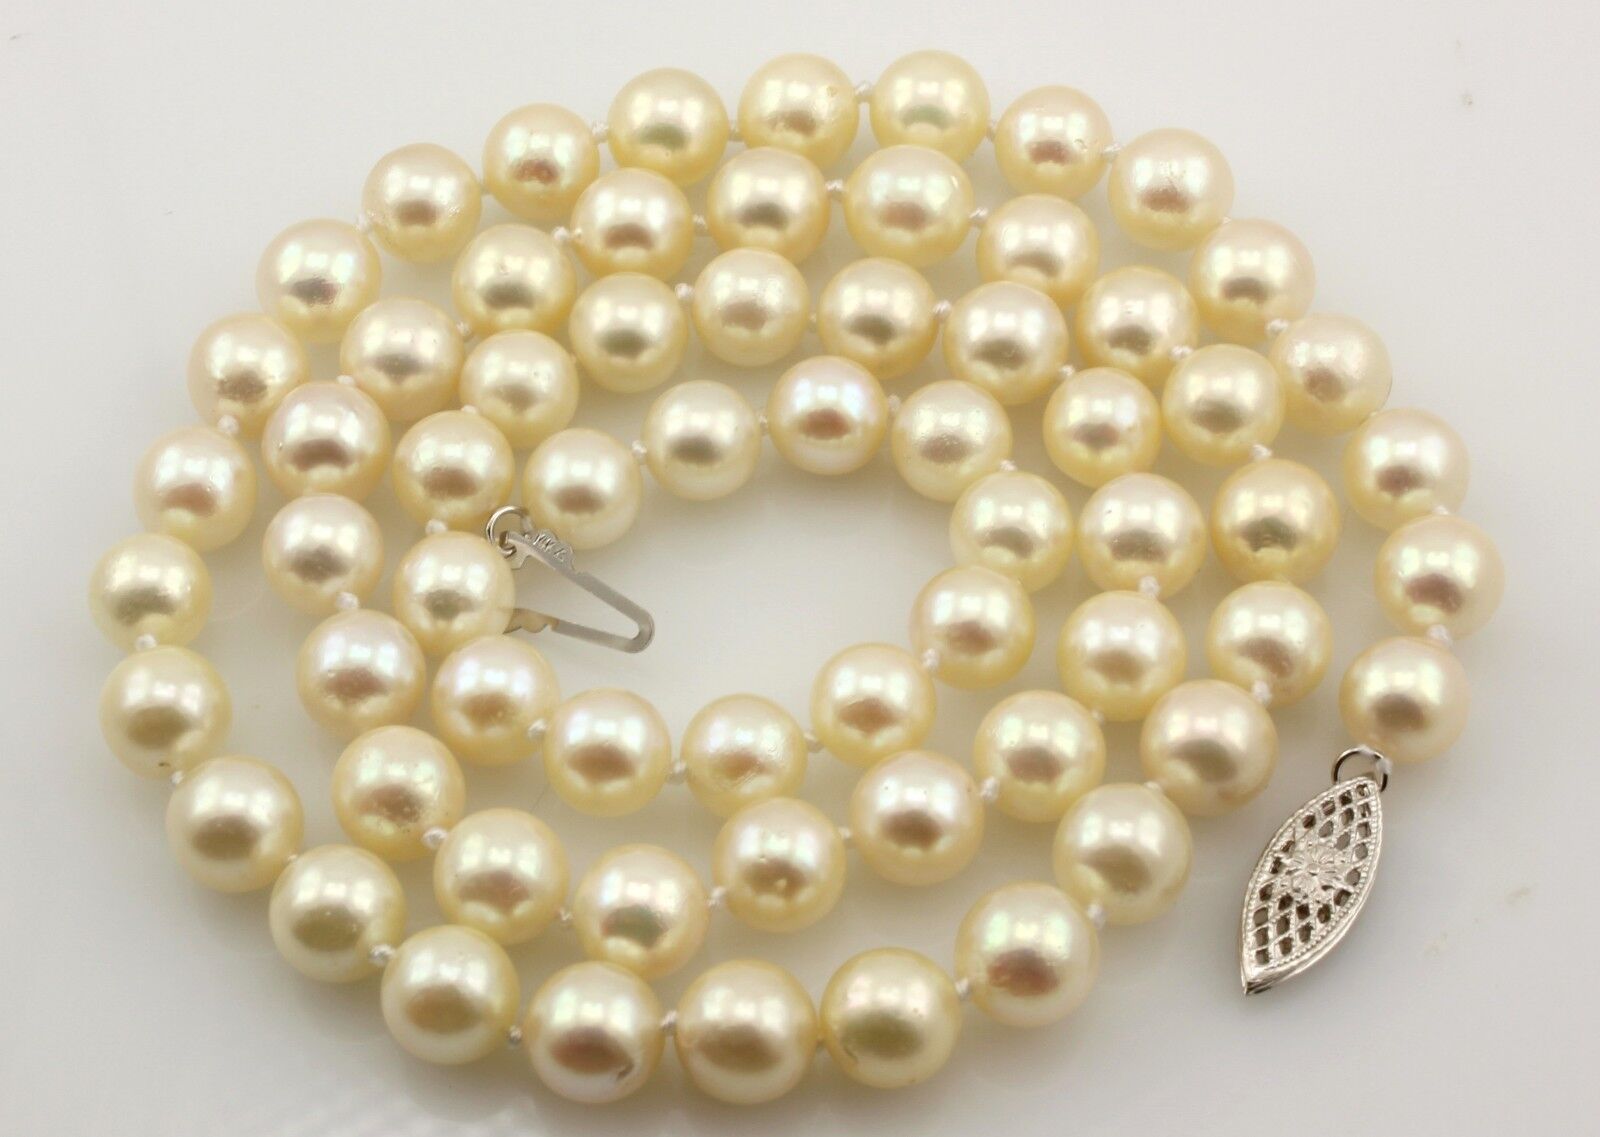 Beauty White Pearl Necklace Round 4-8mm| Alibaba.com